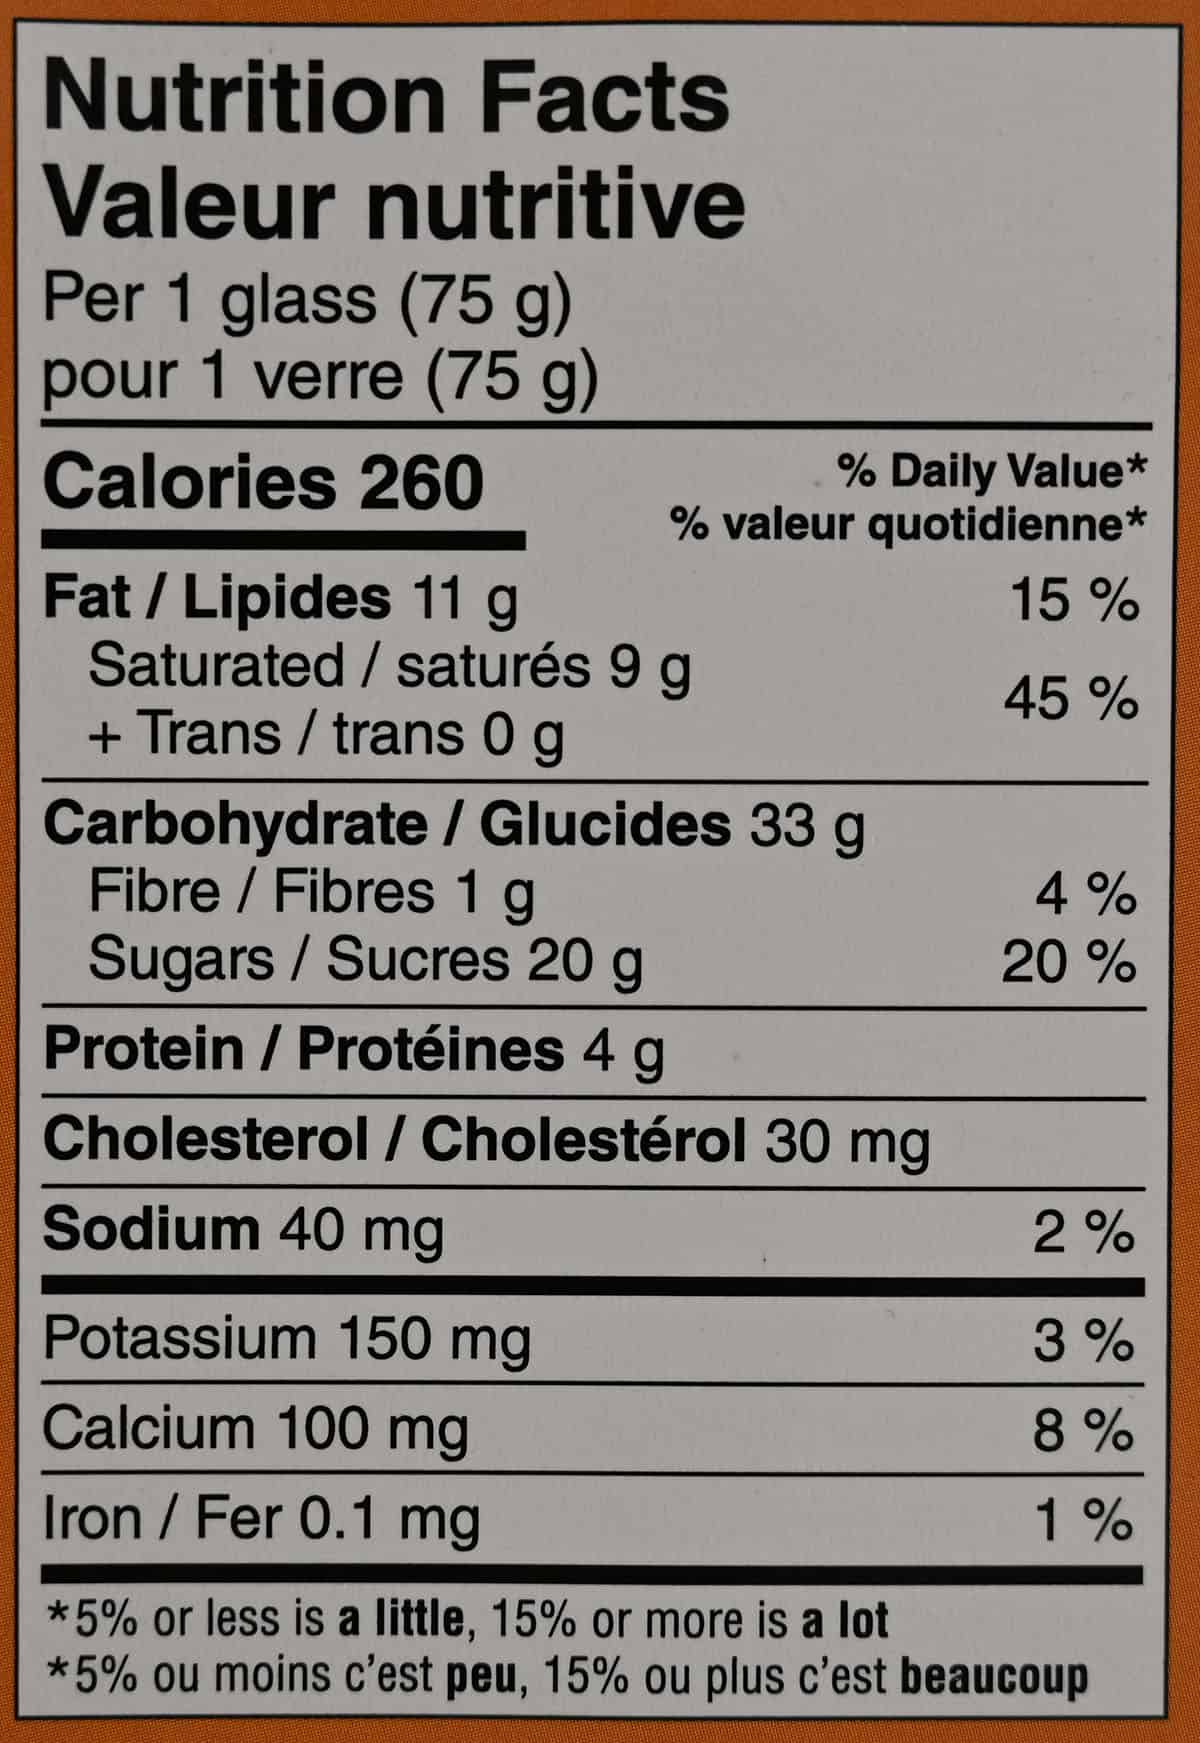 Nutrition facts from dessert packaging.